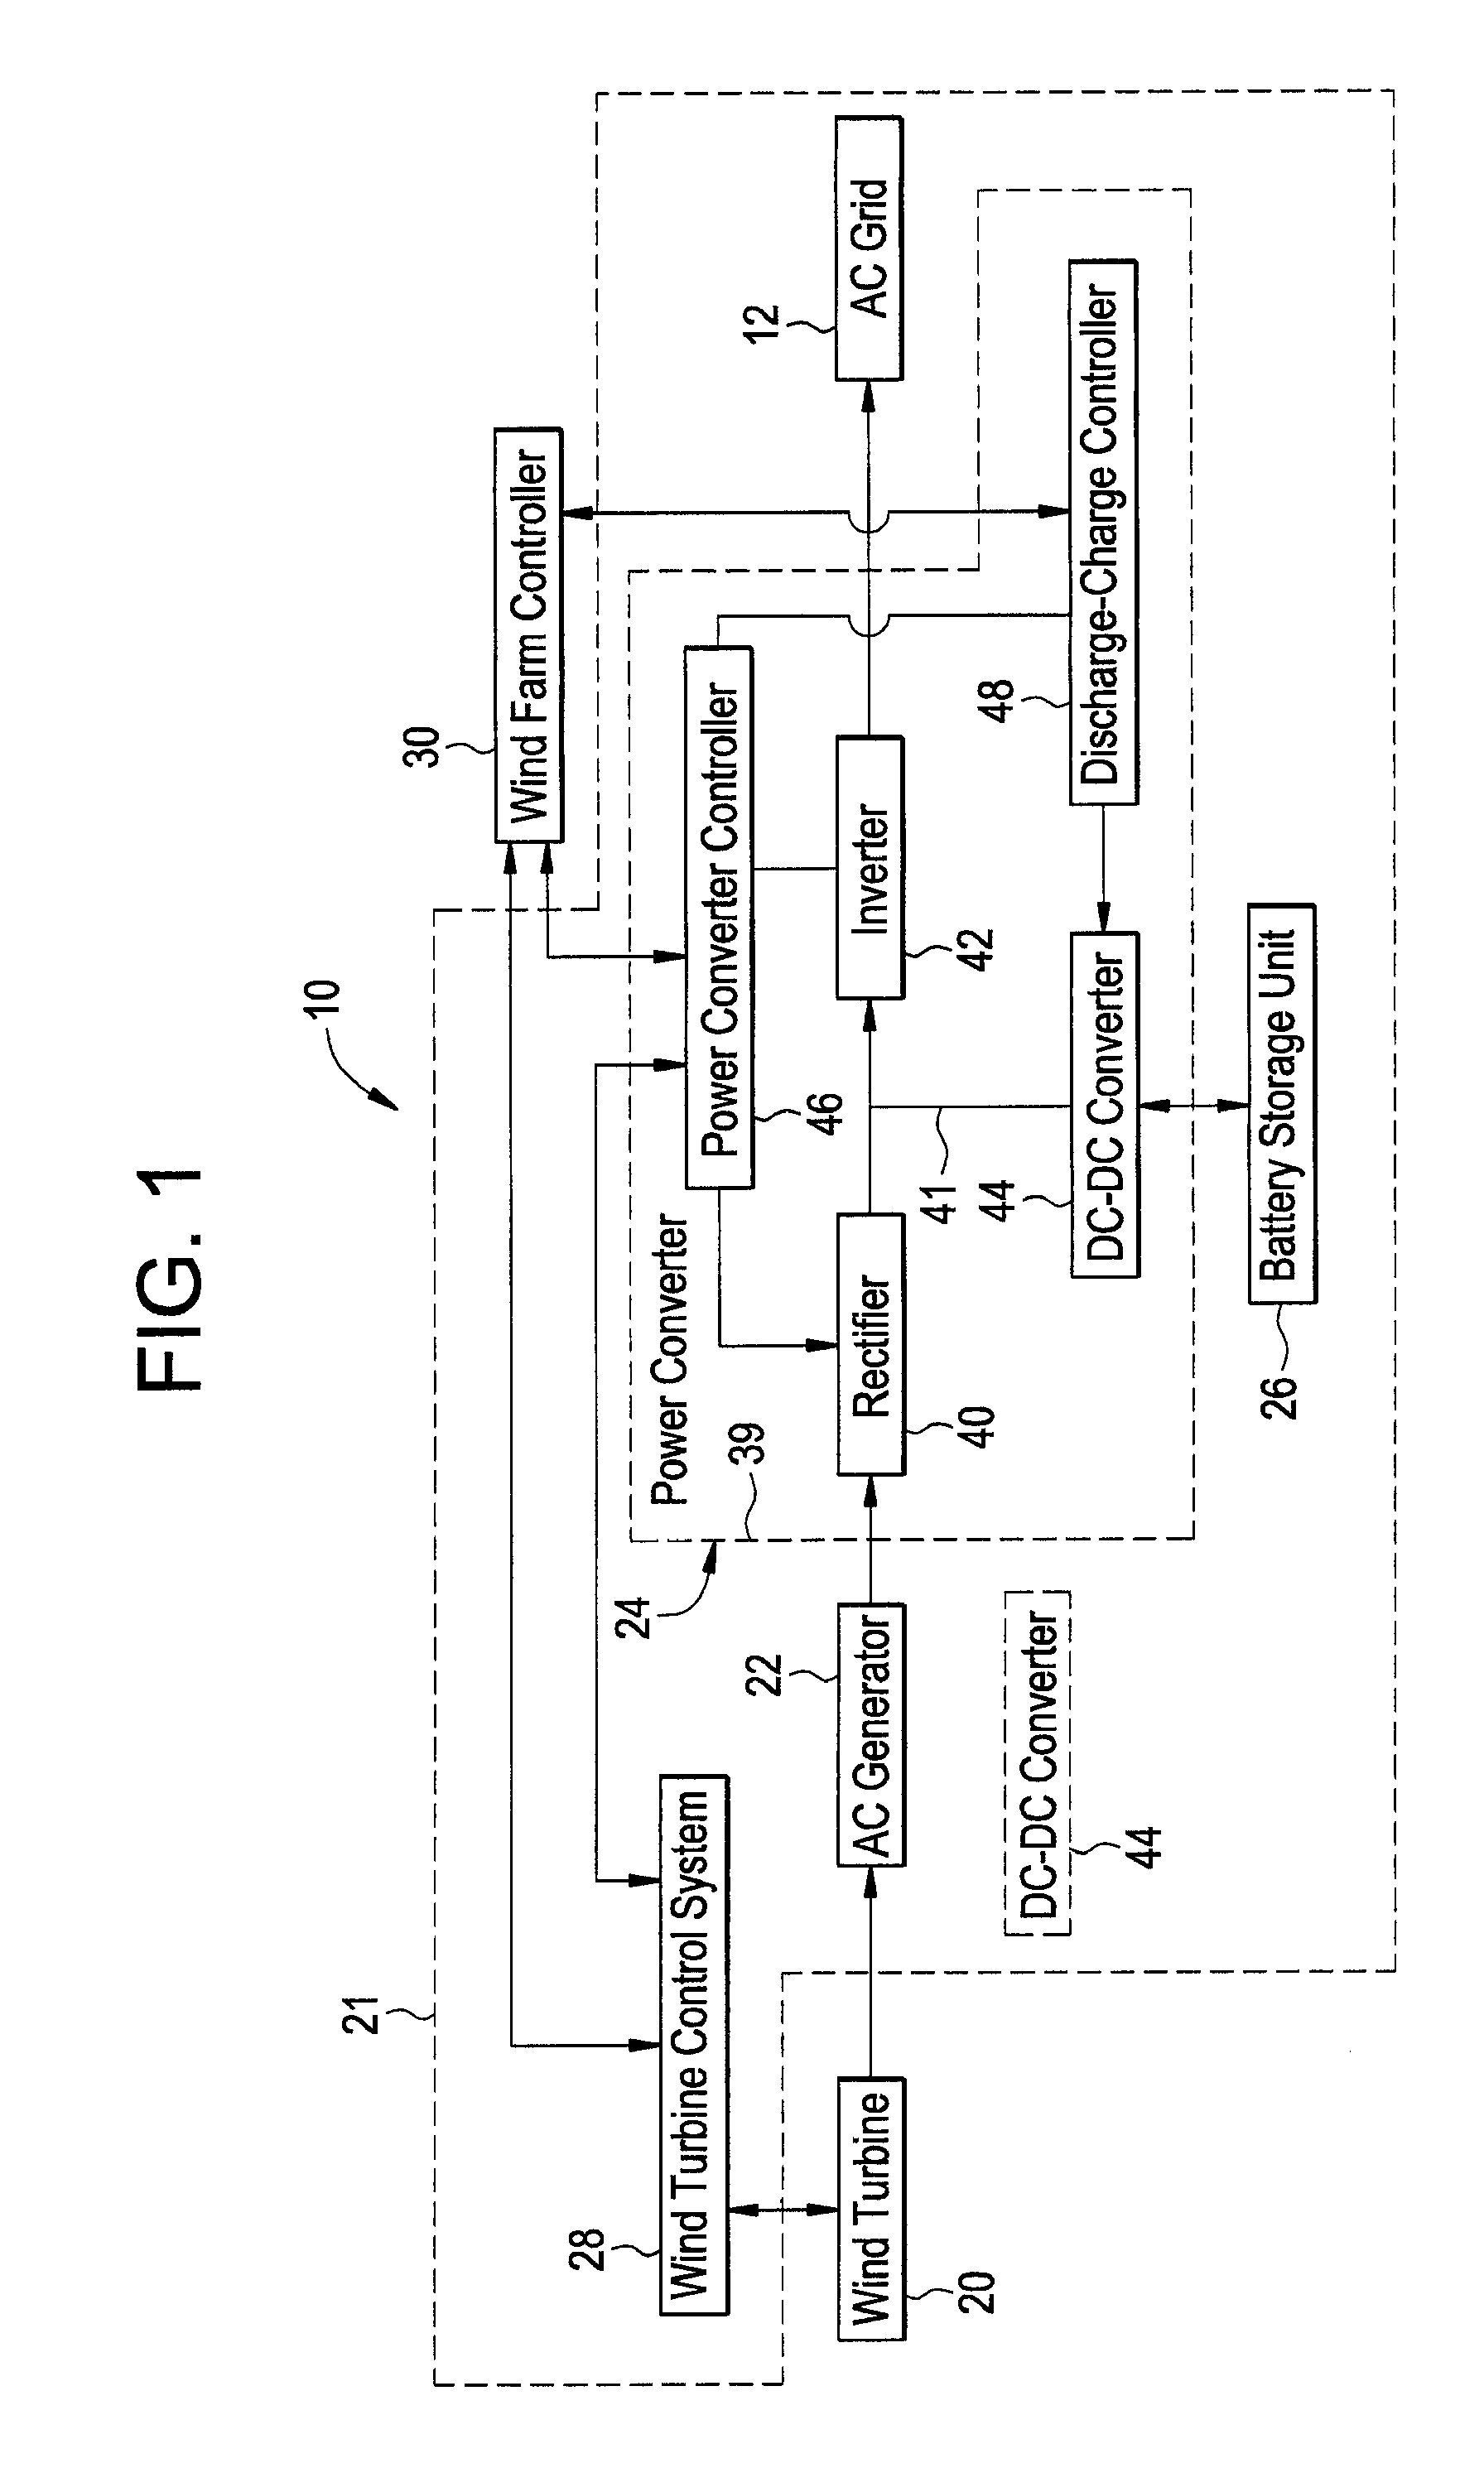 Power generation system and method for storing electrical energy